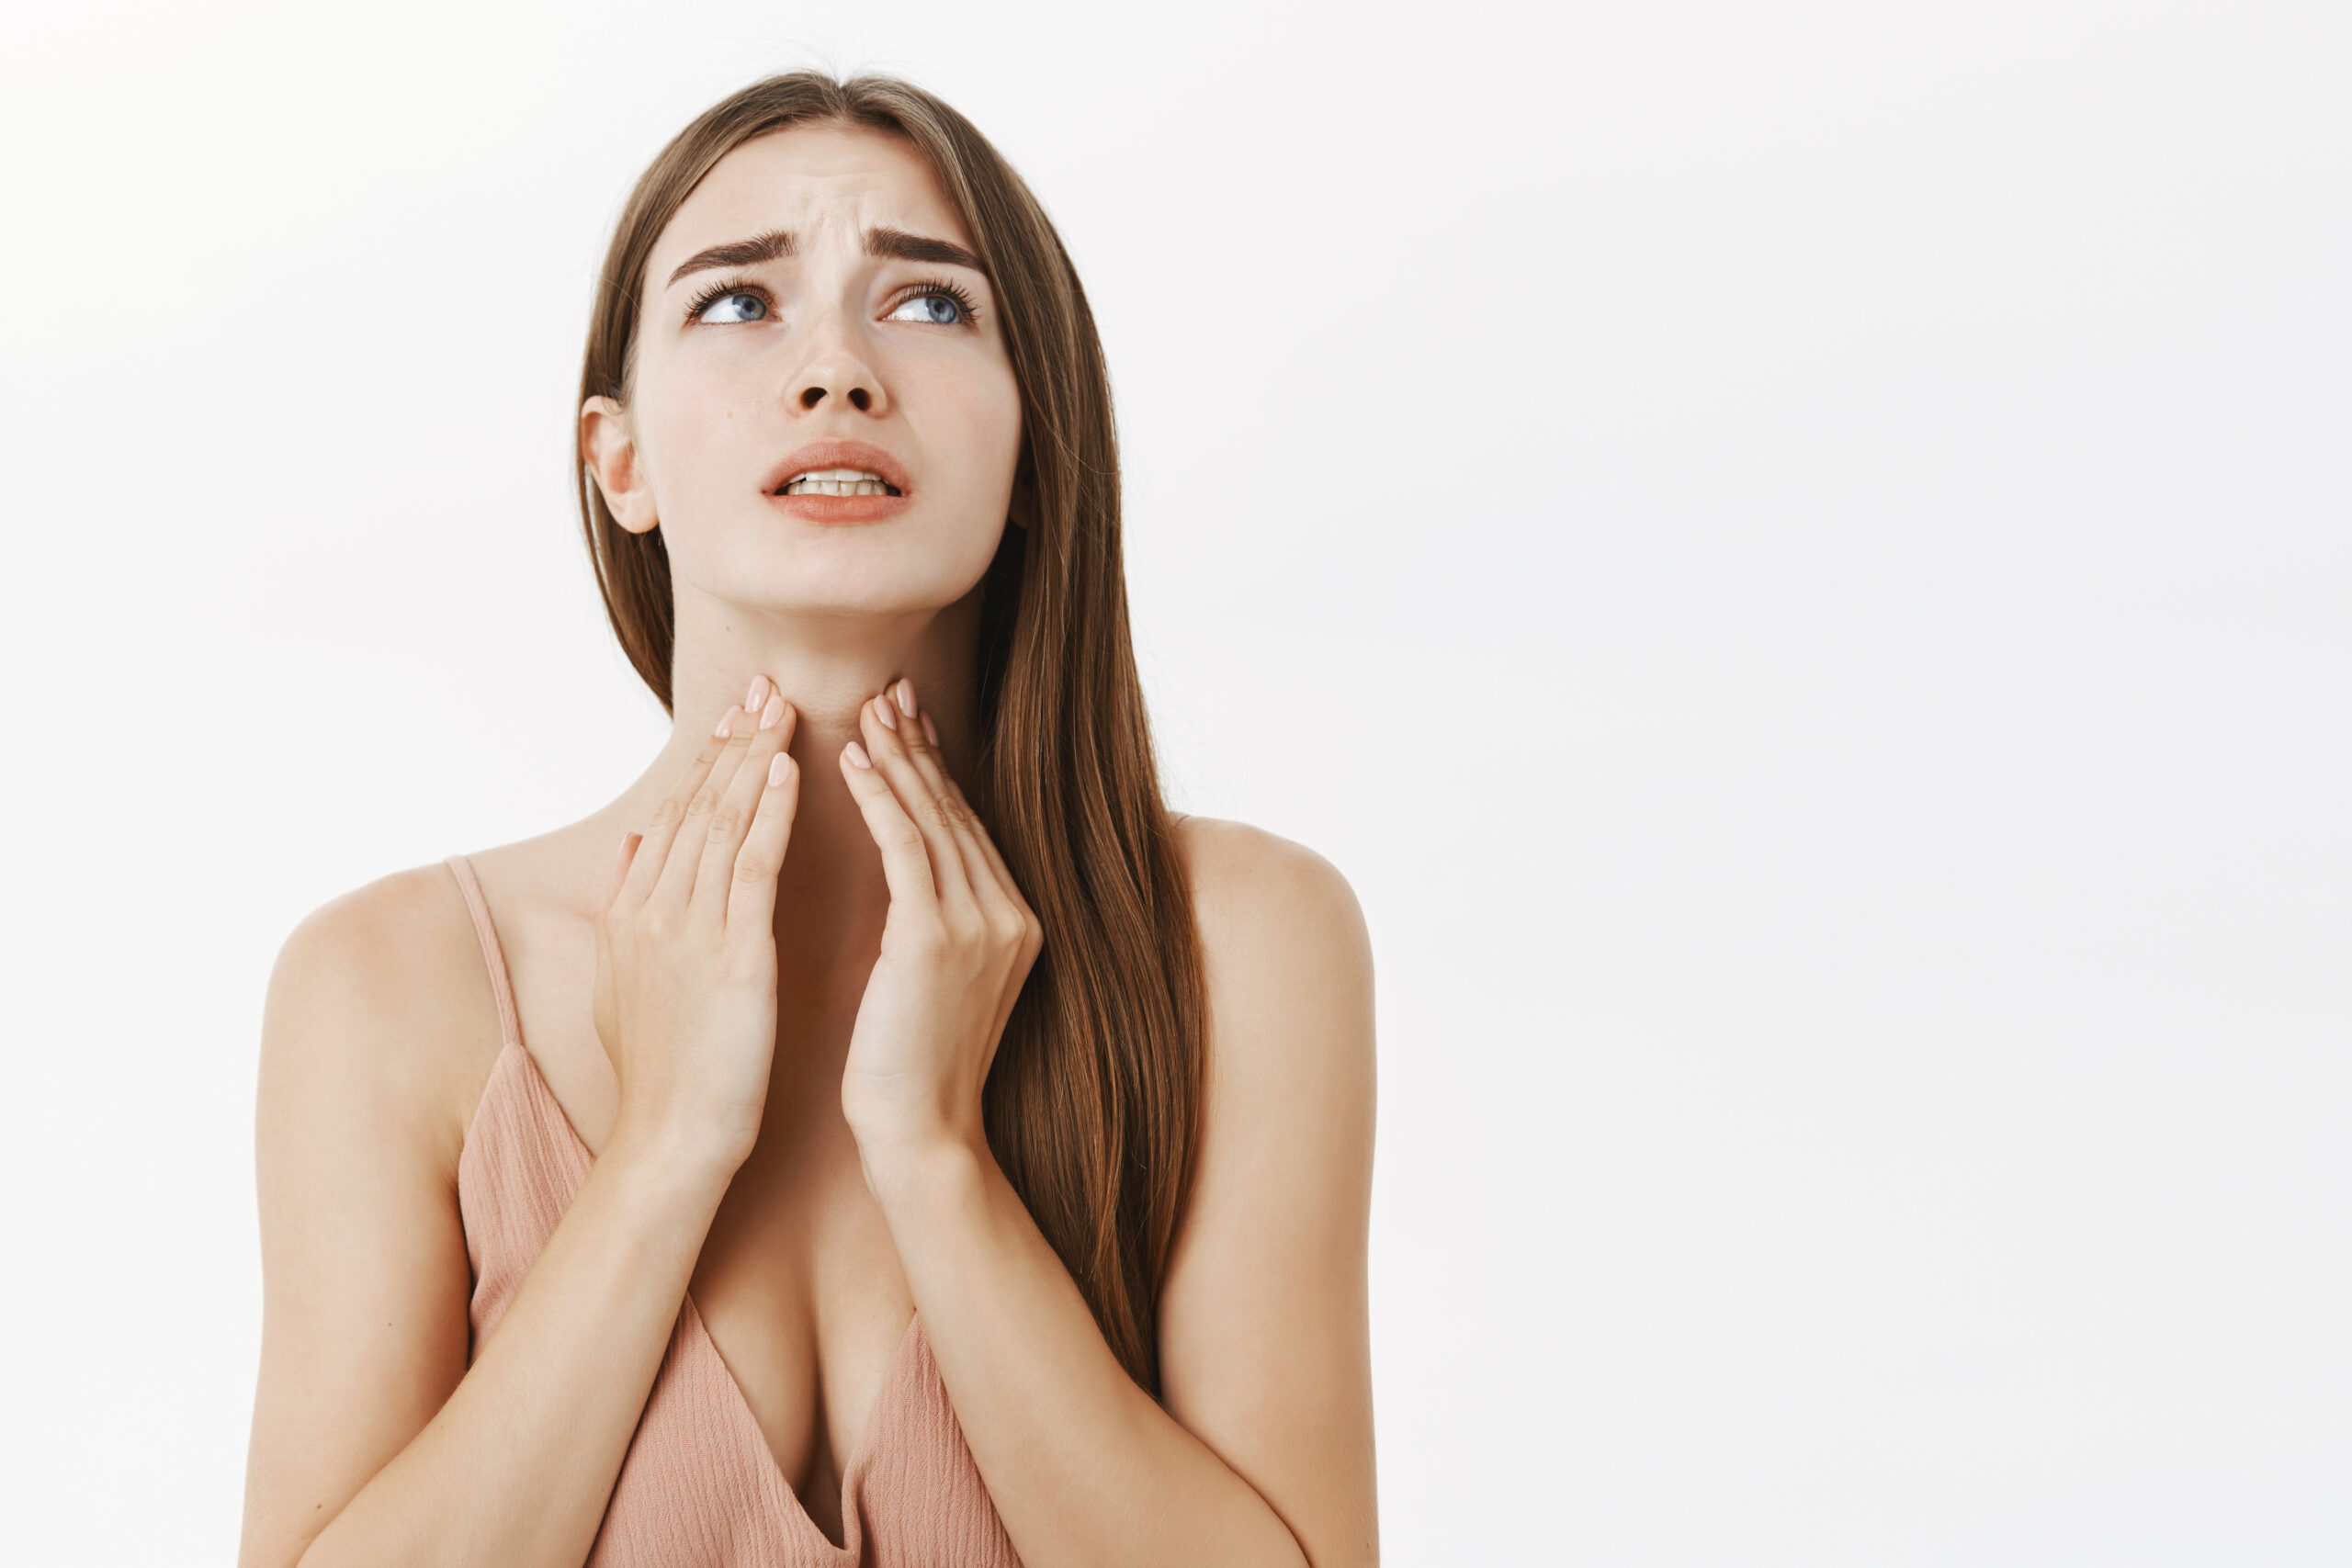 Goiter: What Is, Types, Characteristic Symptoms, and Diagnostics